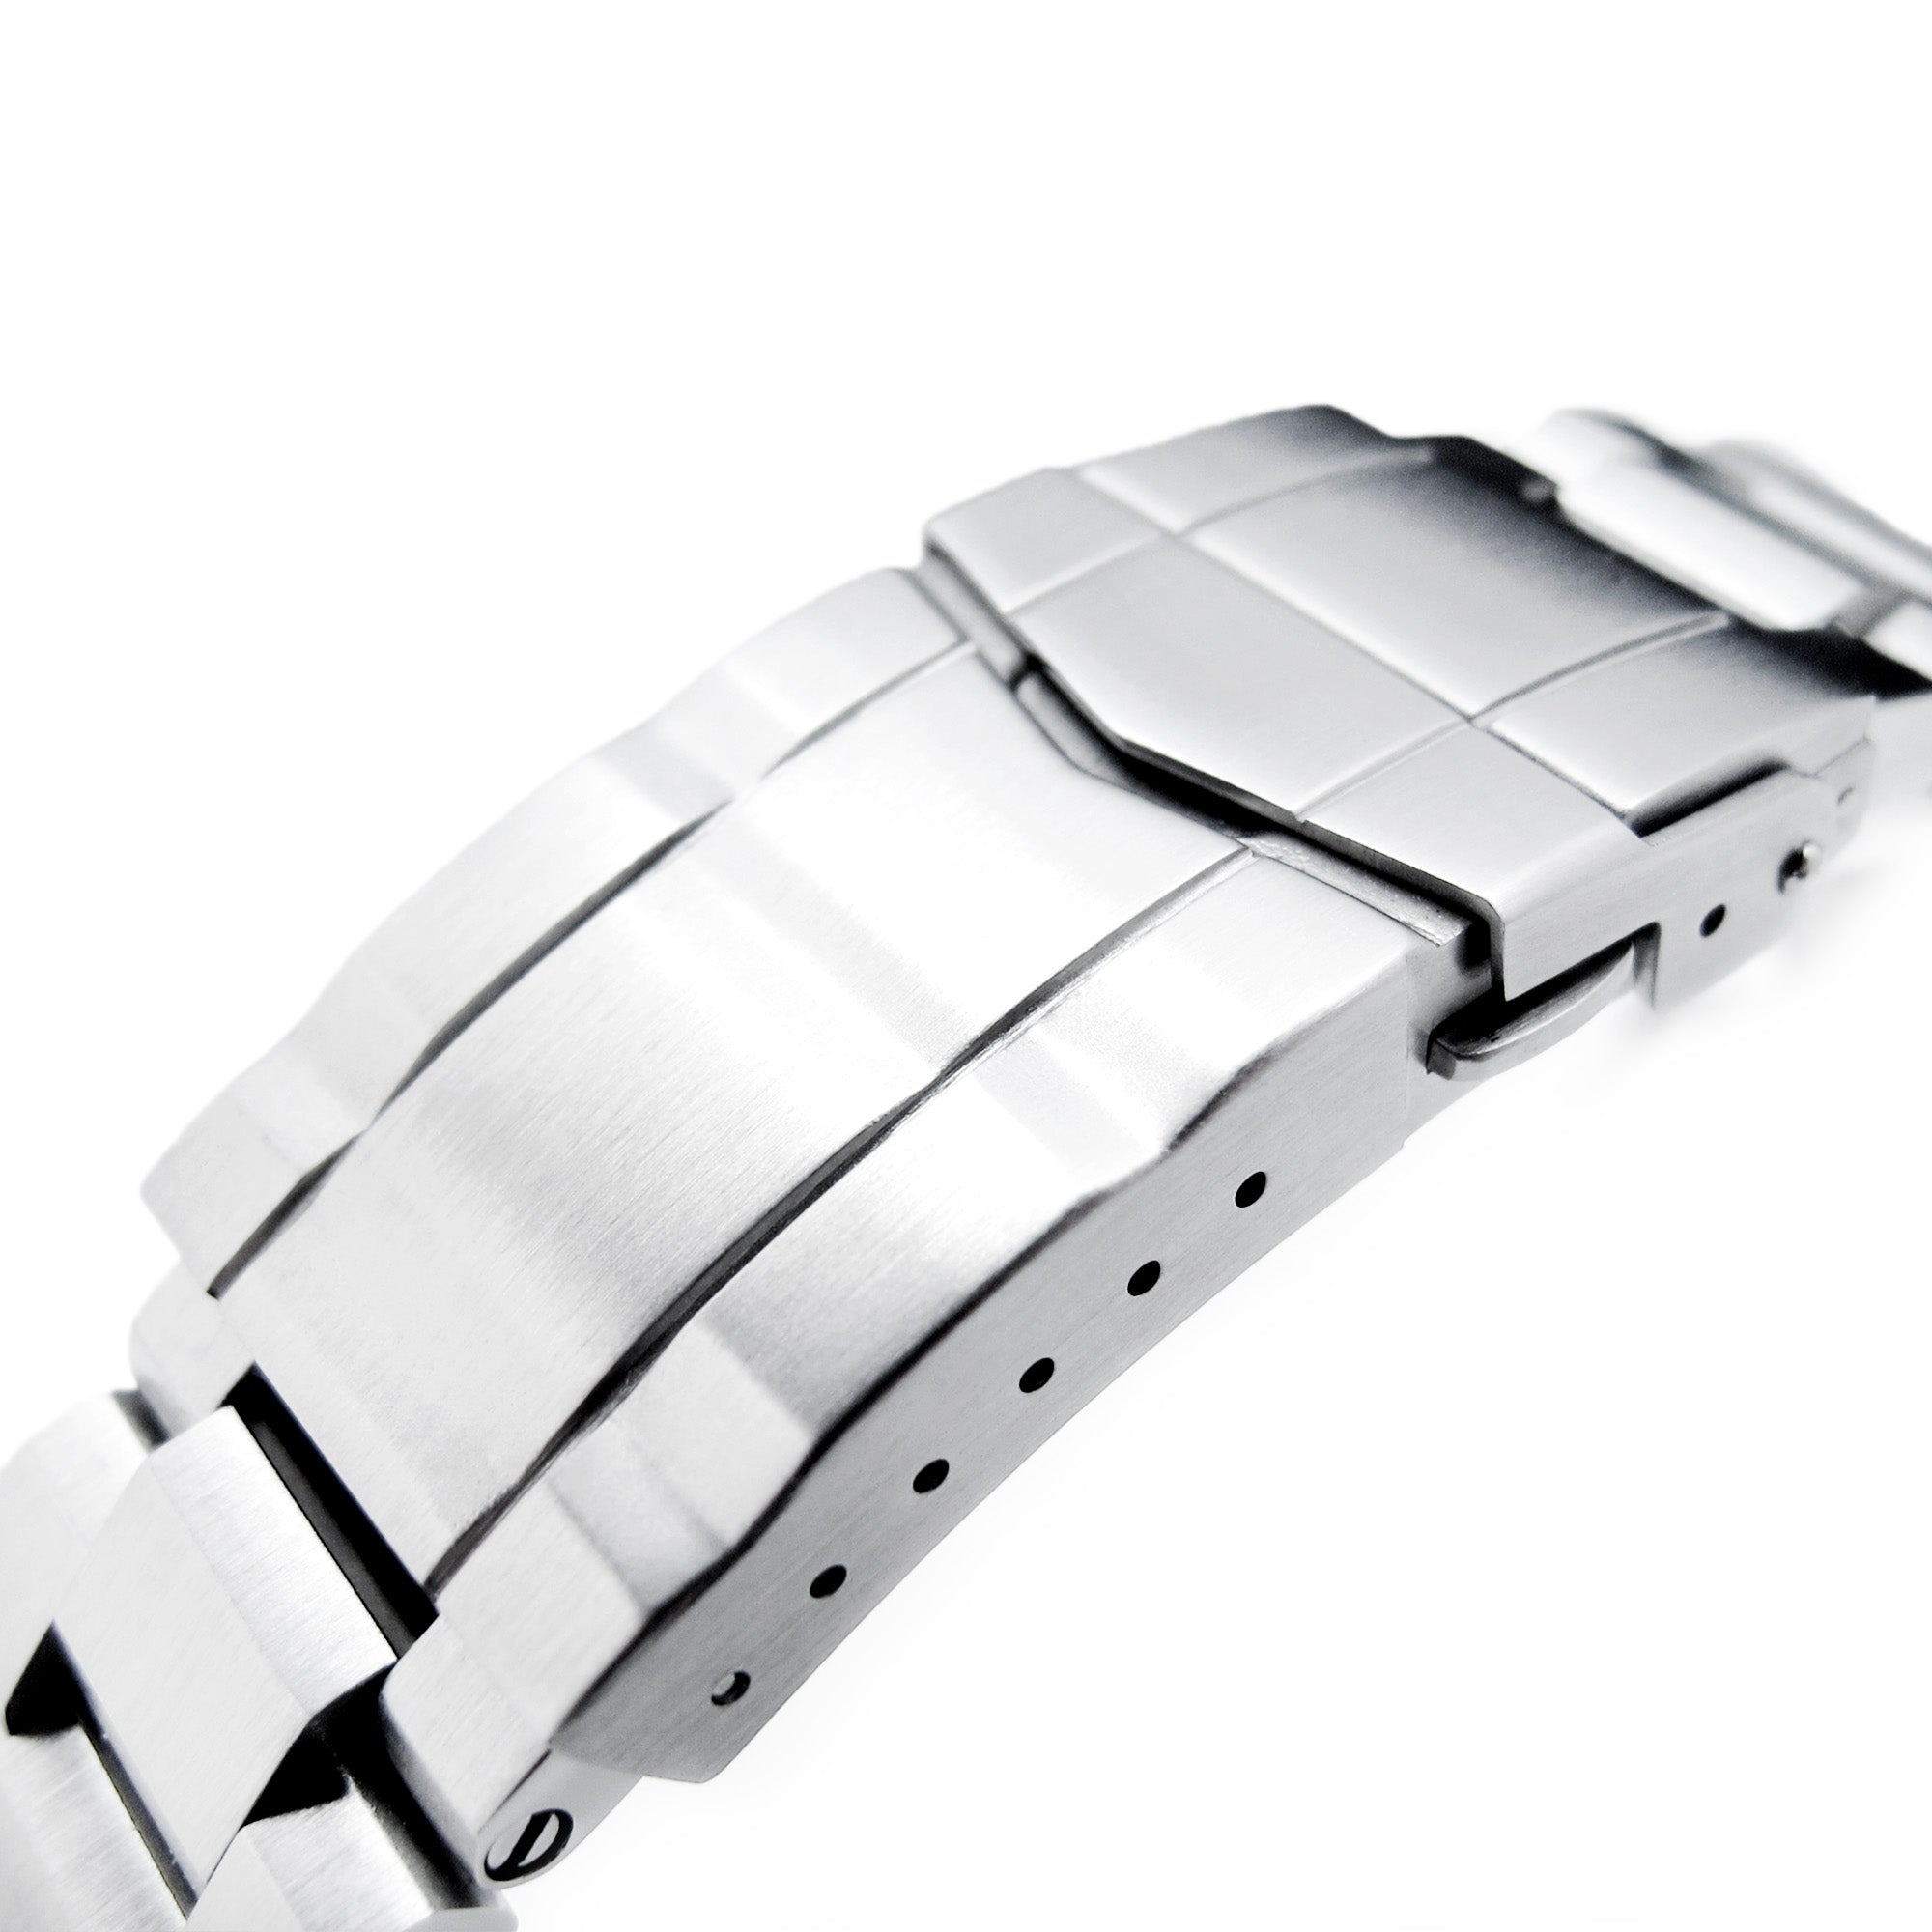 22mm Hexad Watch Band for Seiko King Samurai SRPE33, 316L Stainless Steel Brushed SUB Clasp Strapcode Watch Bands